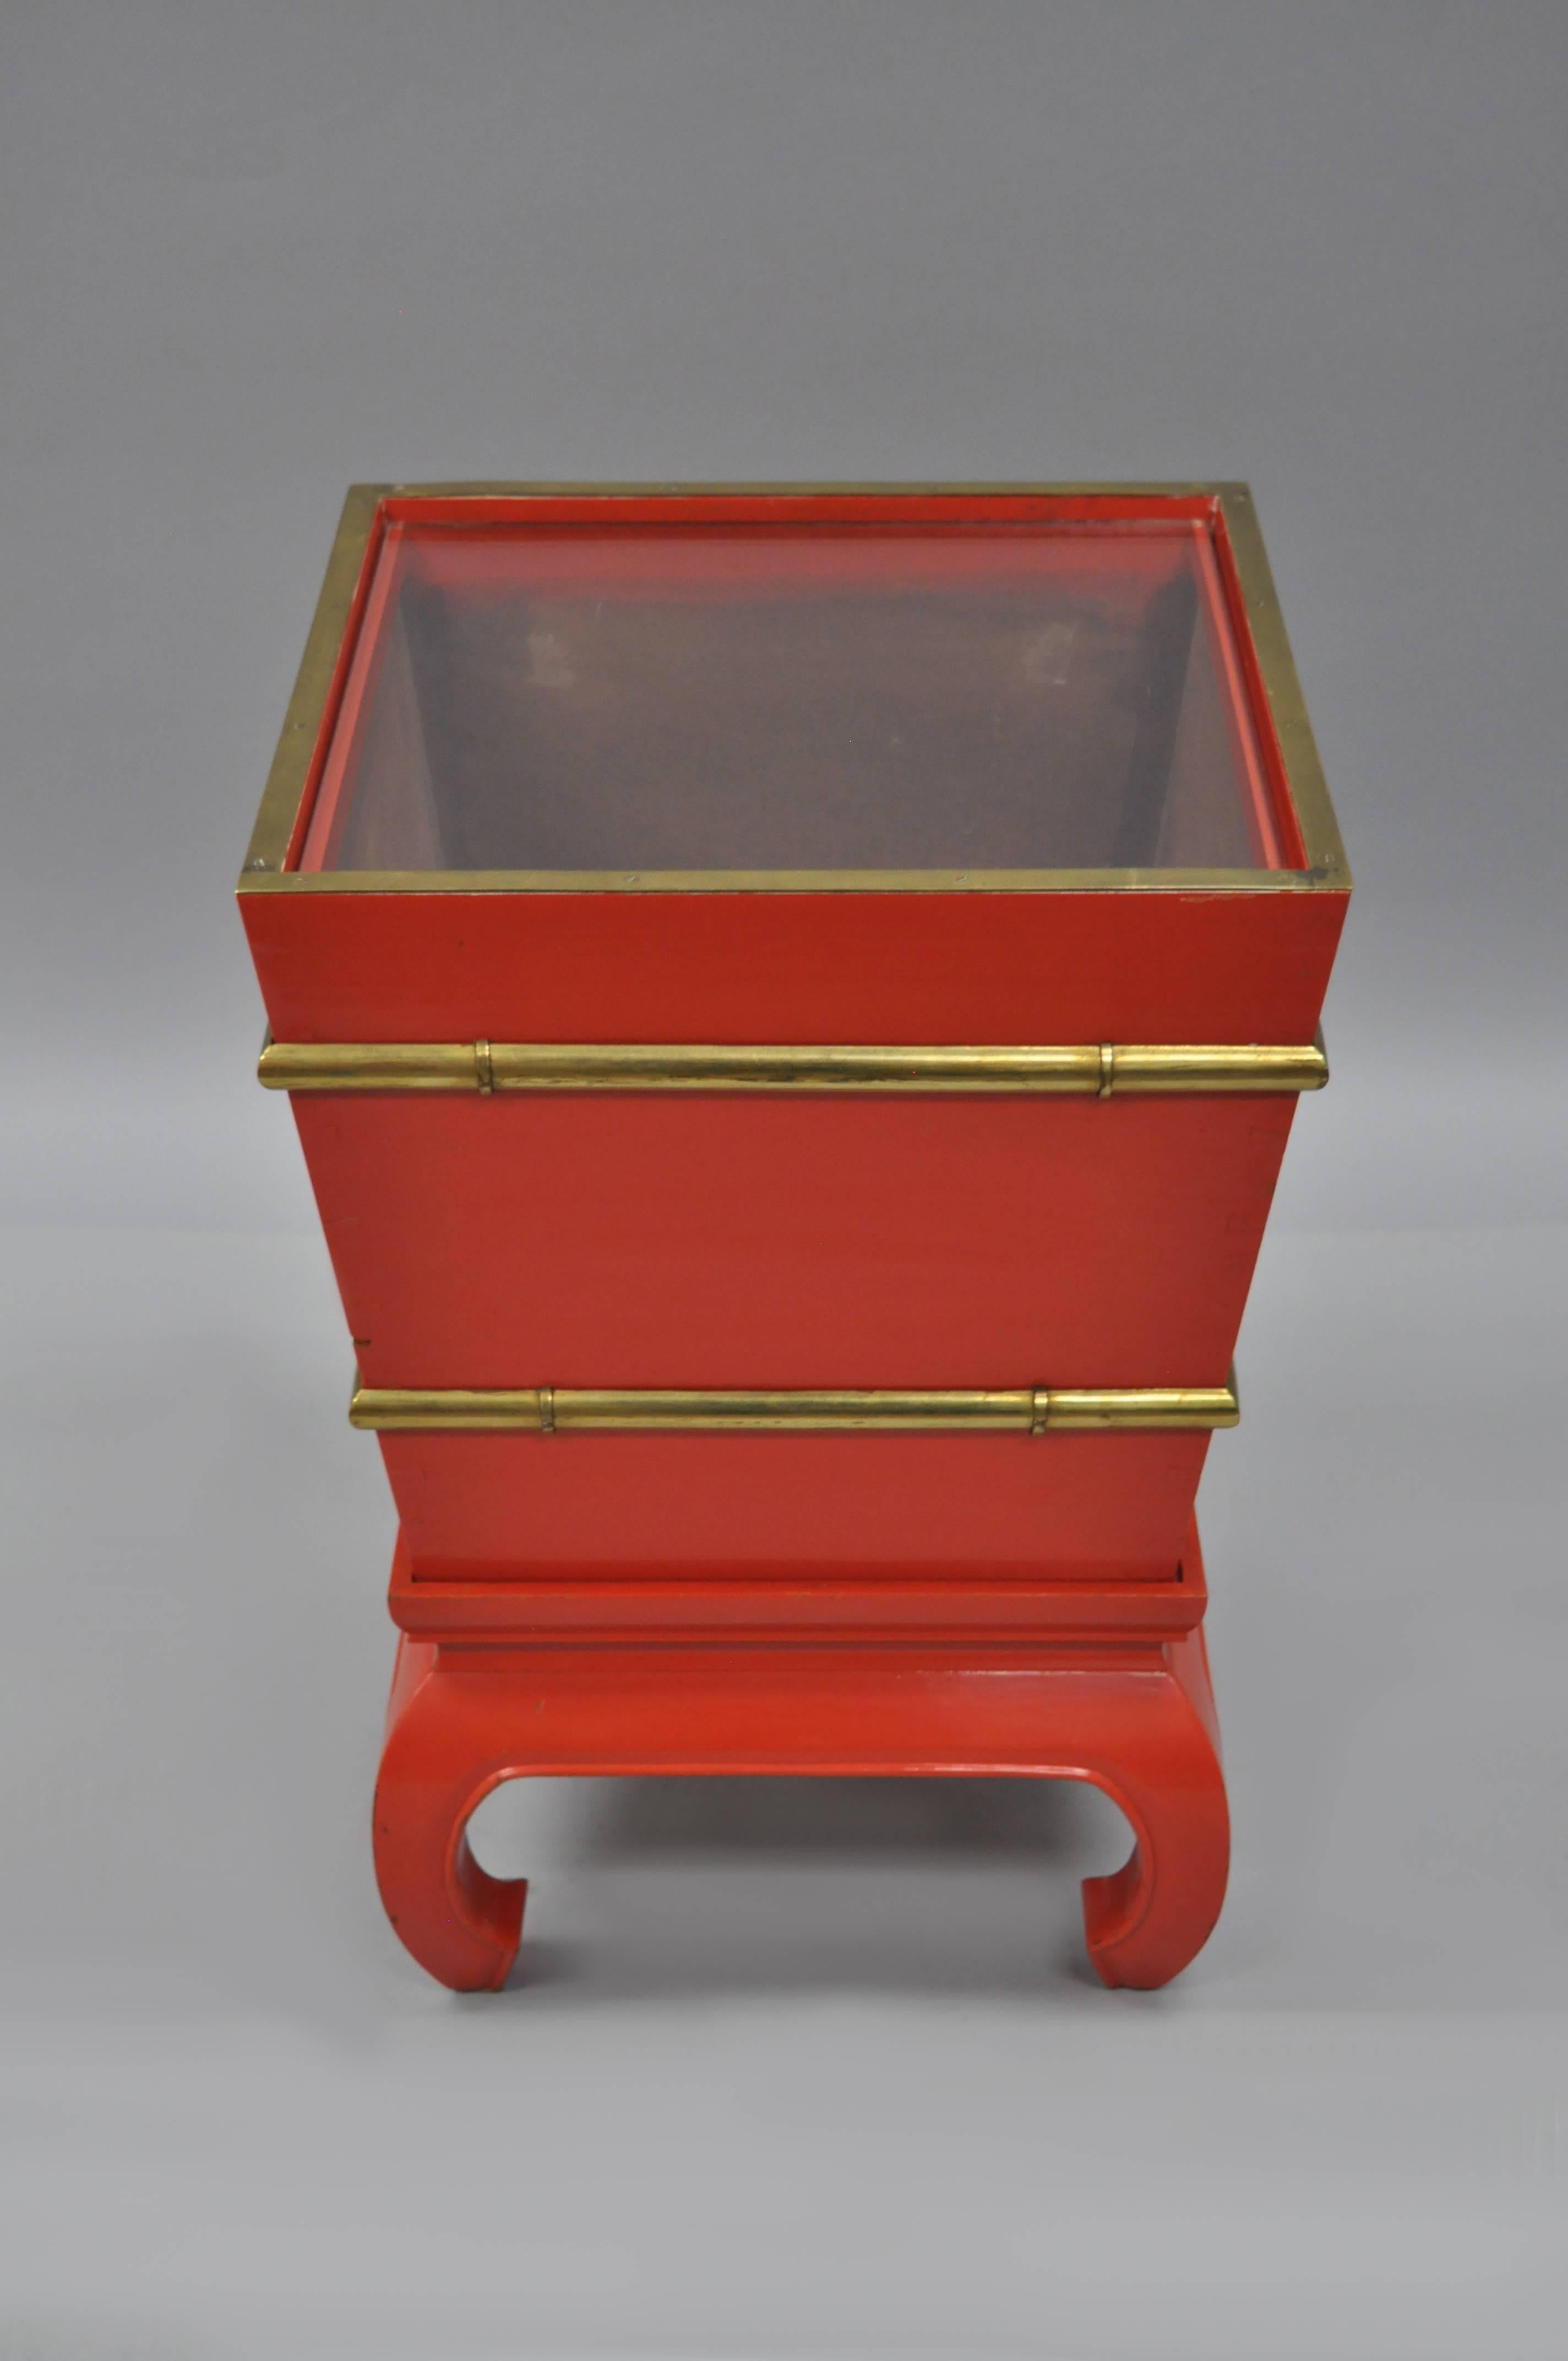 Unique vintage chinoiserie red lacquered solid wood accent table on base. Item features 2 part solid wood dovetail construction, inset removable glass top, open interior, solid brass faux bamboo details and trim, heavy brass handles on two sides